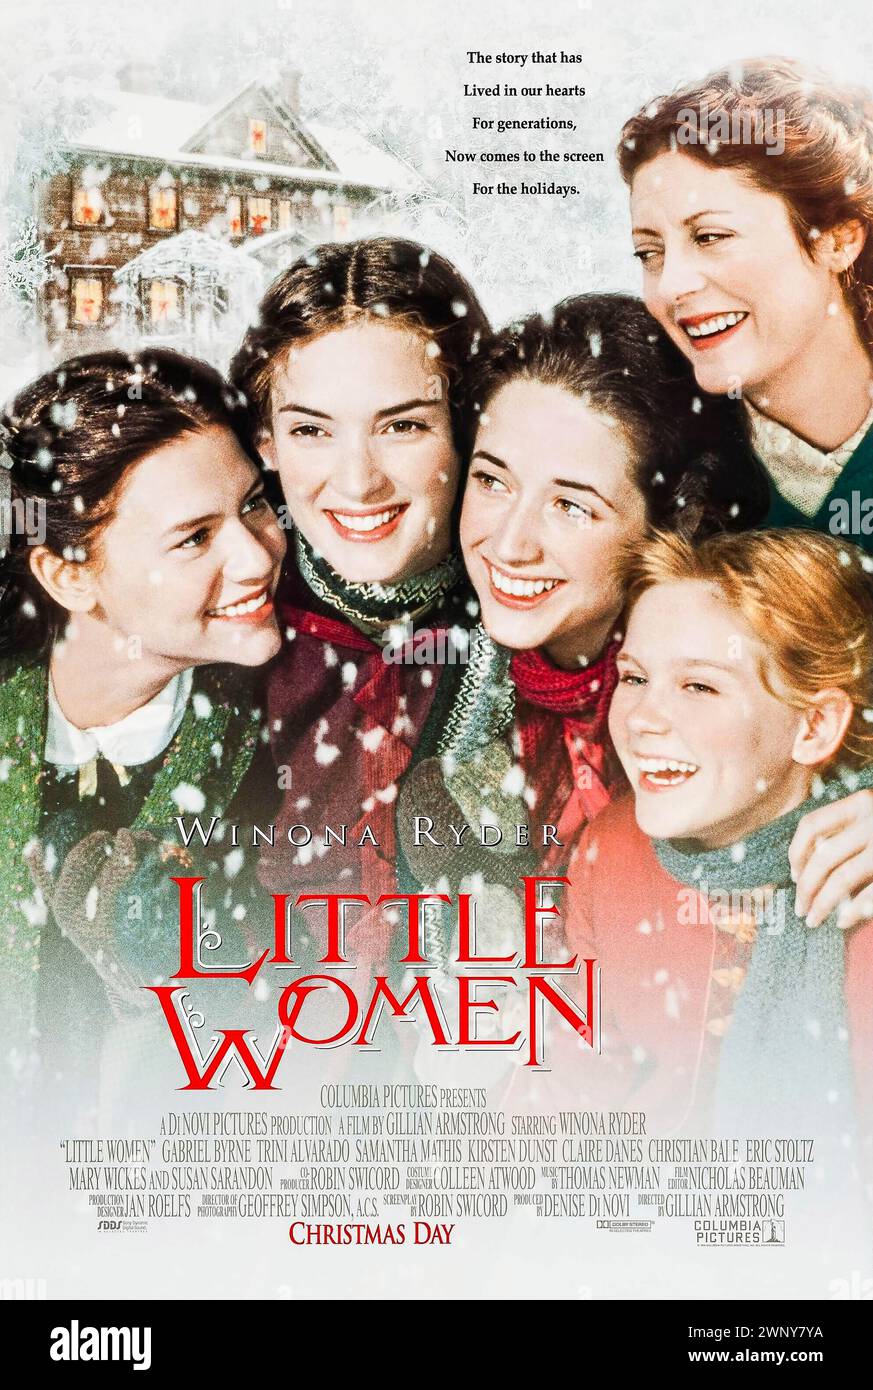 Little Women (1994) directed by Gillian Armstrong and starring Susan Sarandon, Winona Ryder, Kirsten Dunst, Claire Danes and Trini Alvarado. Adaptation of Louisa May Alcott's autobiographical novel about the March sisters in post-Civil War America. Photograph of an original 1994 US one sheet poster. ***EDITORIAL USE ONLY*** Credit: BFA / Columbia Pictures Stock Photo